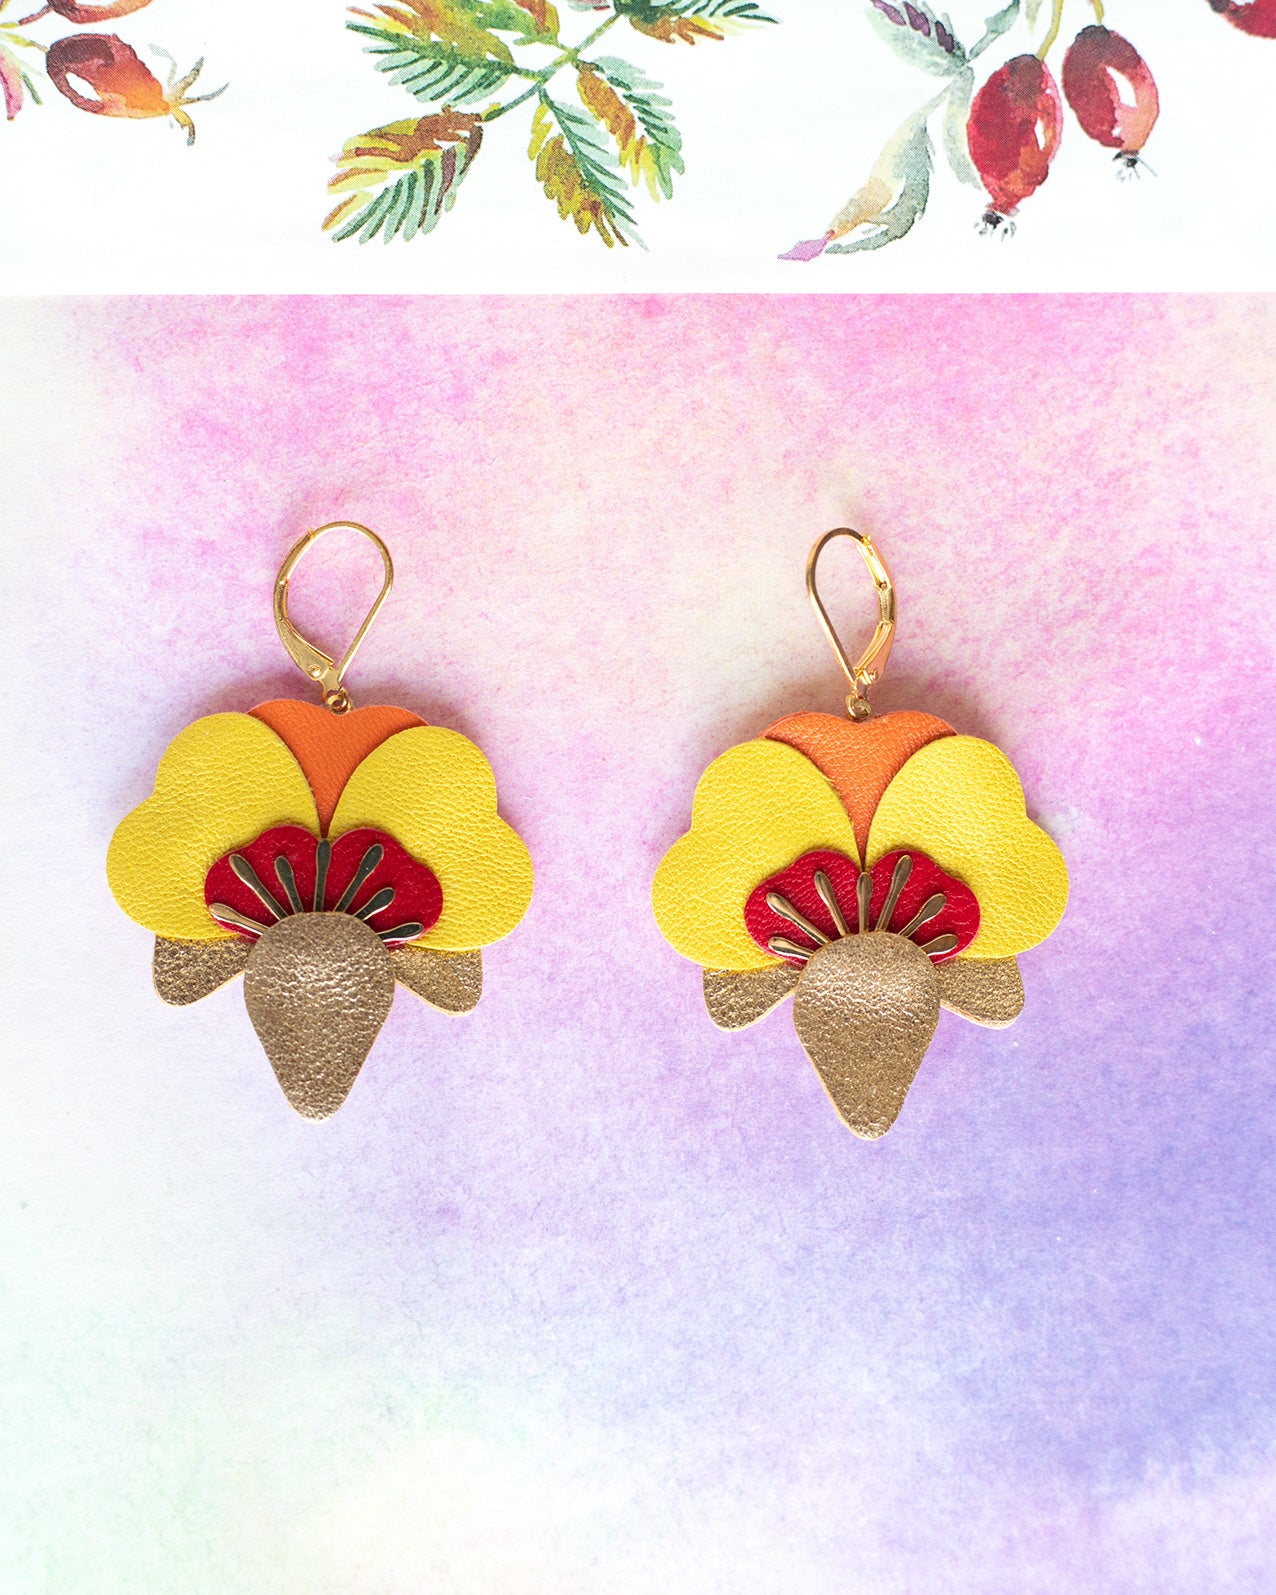 Orchid earrings - gold, red, yellow, orange